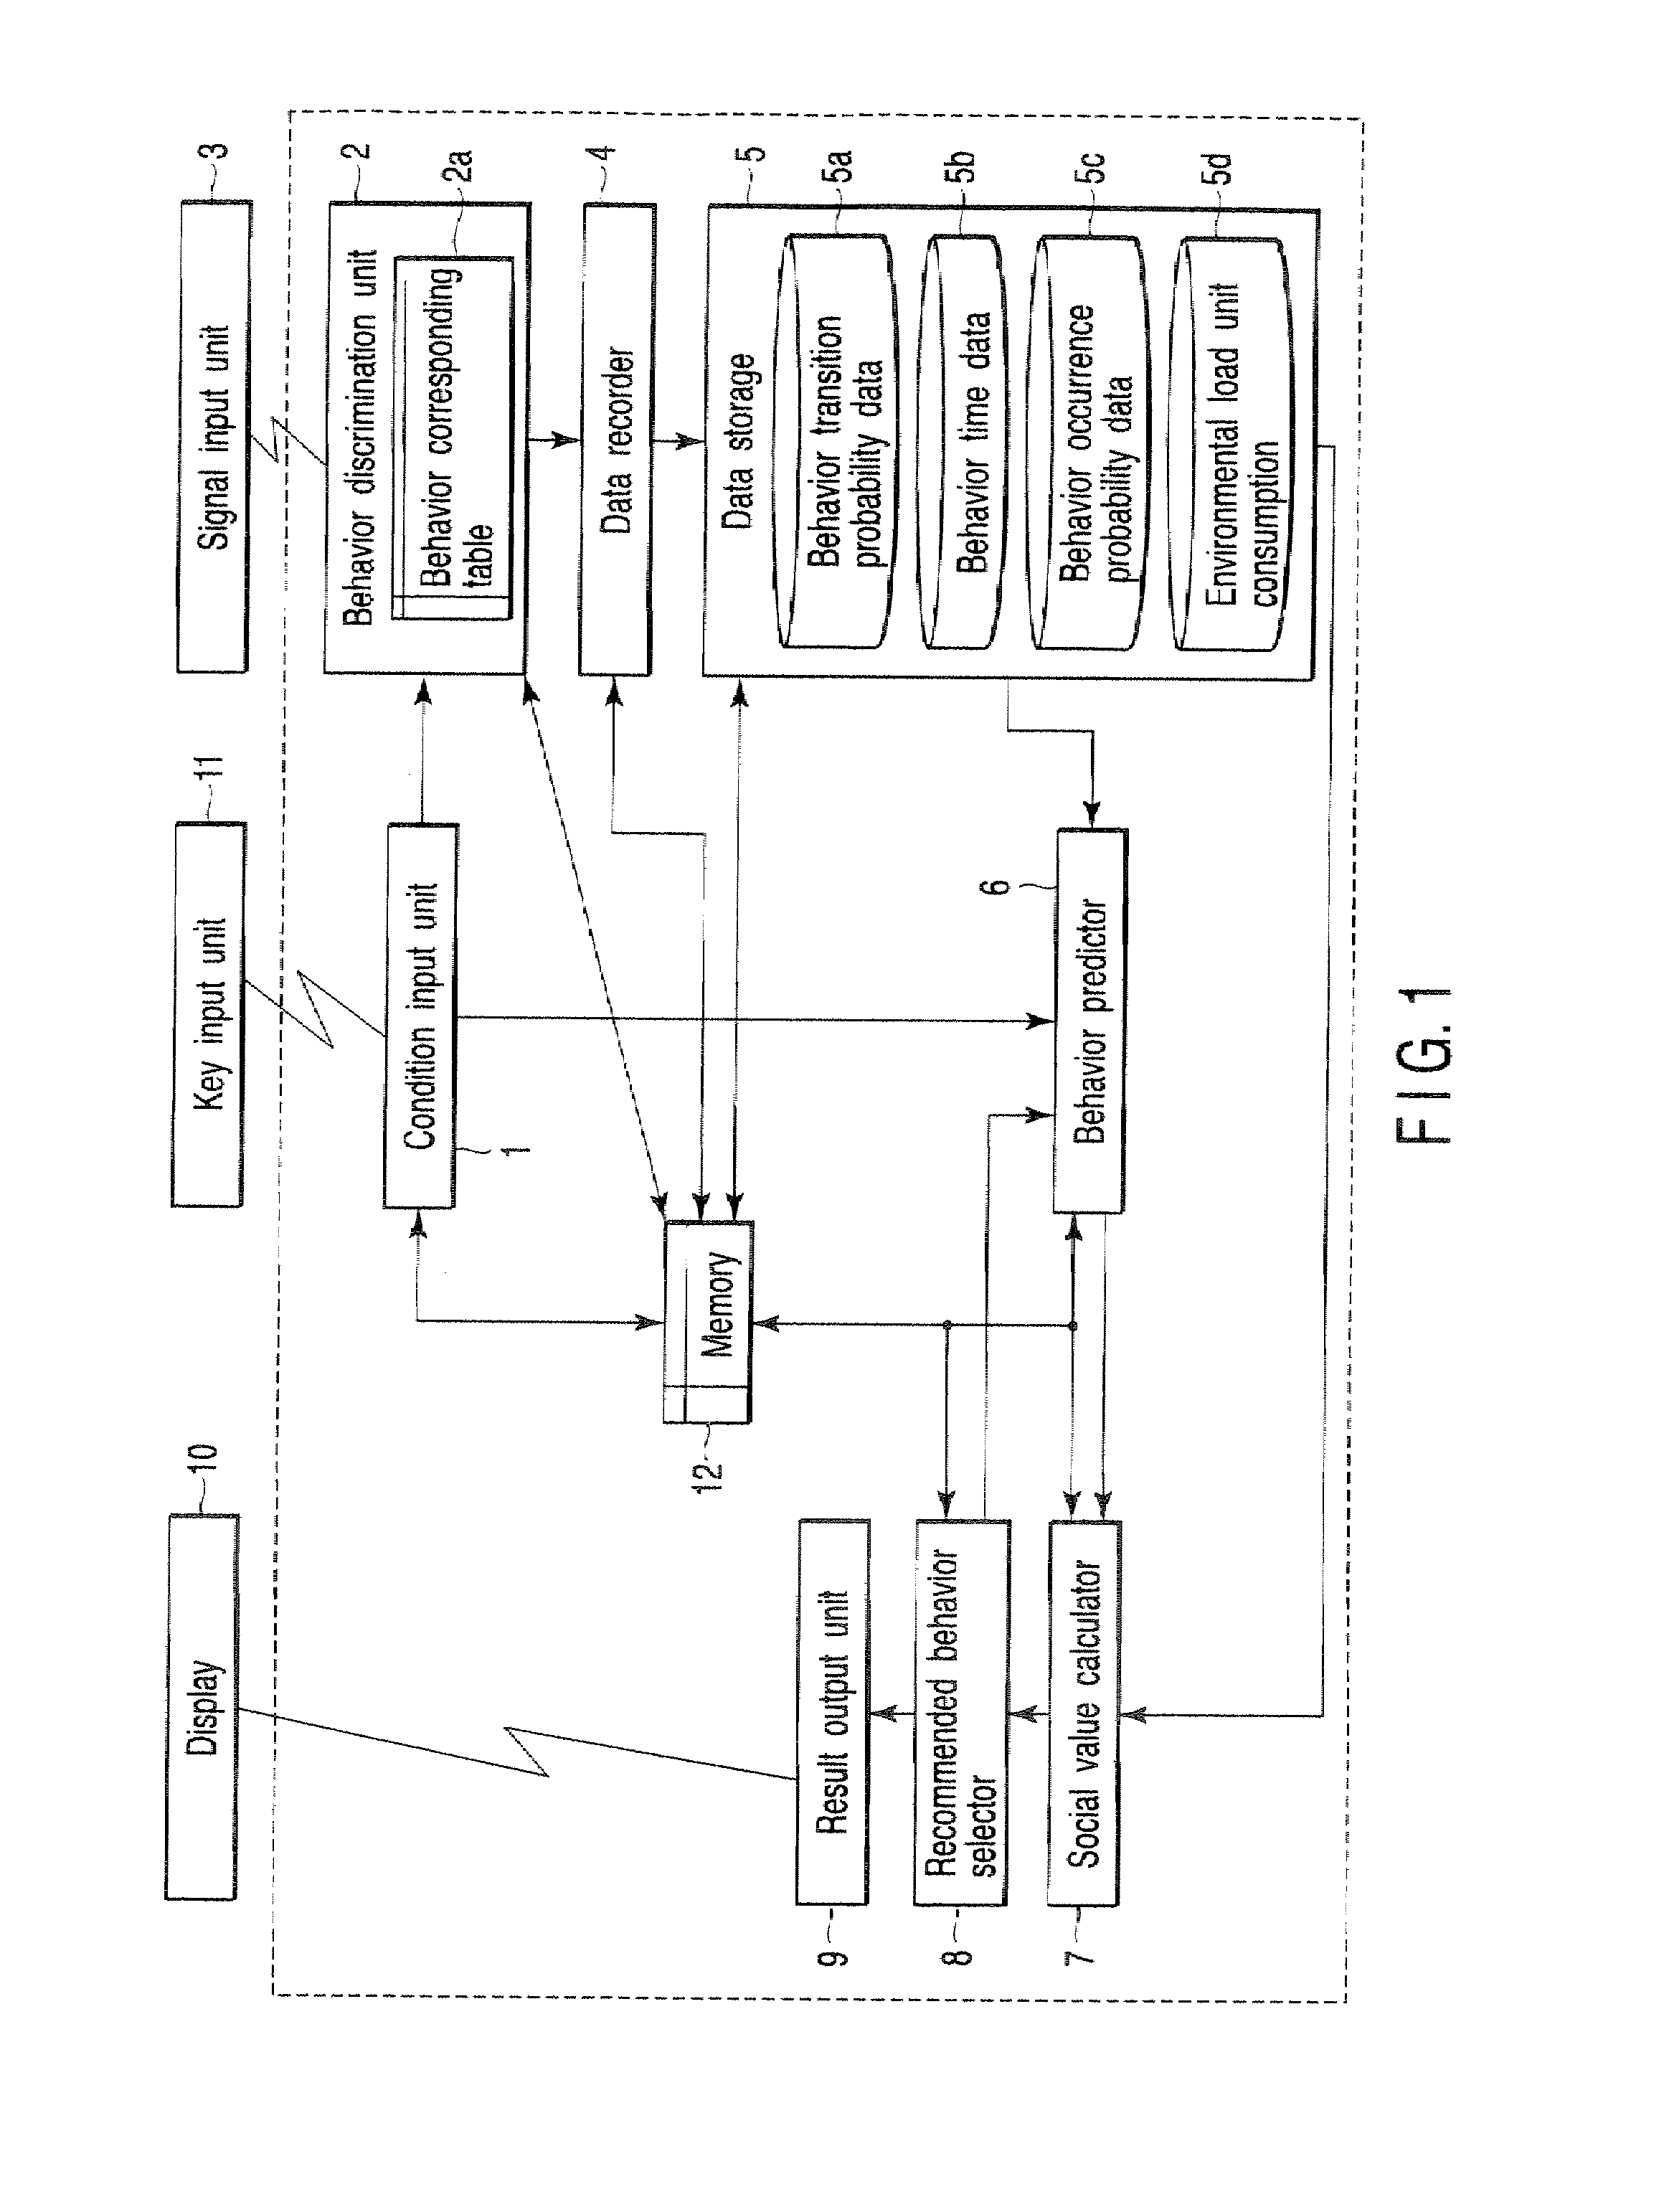 Behavior prediction apparatus and method therefor